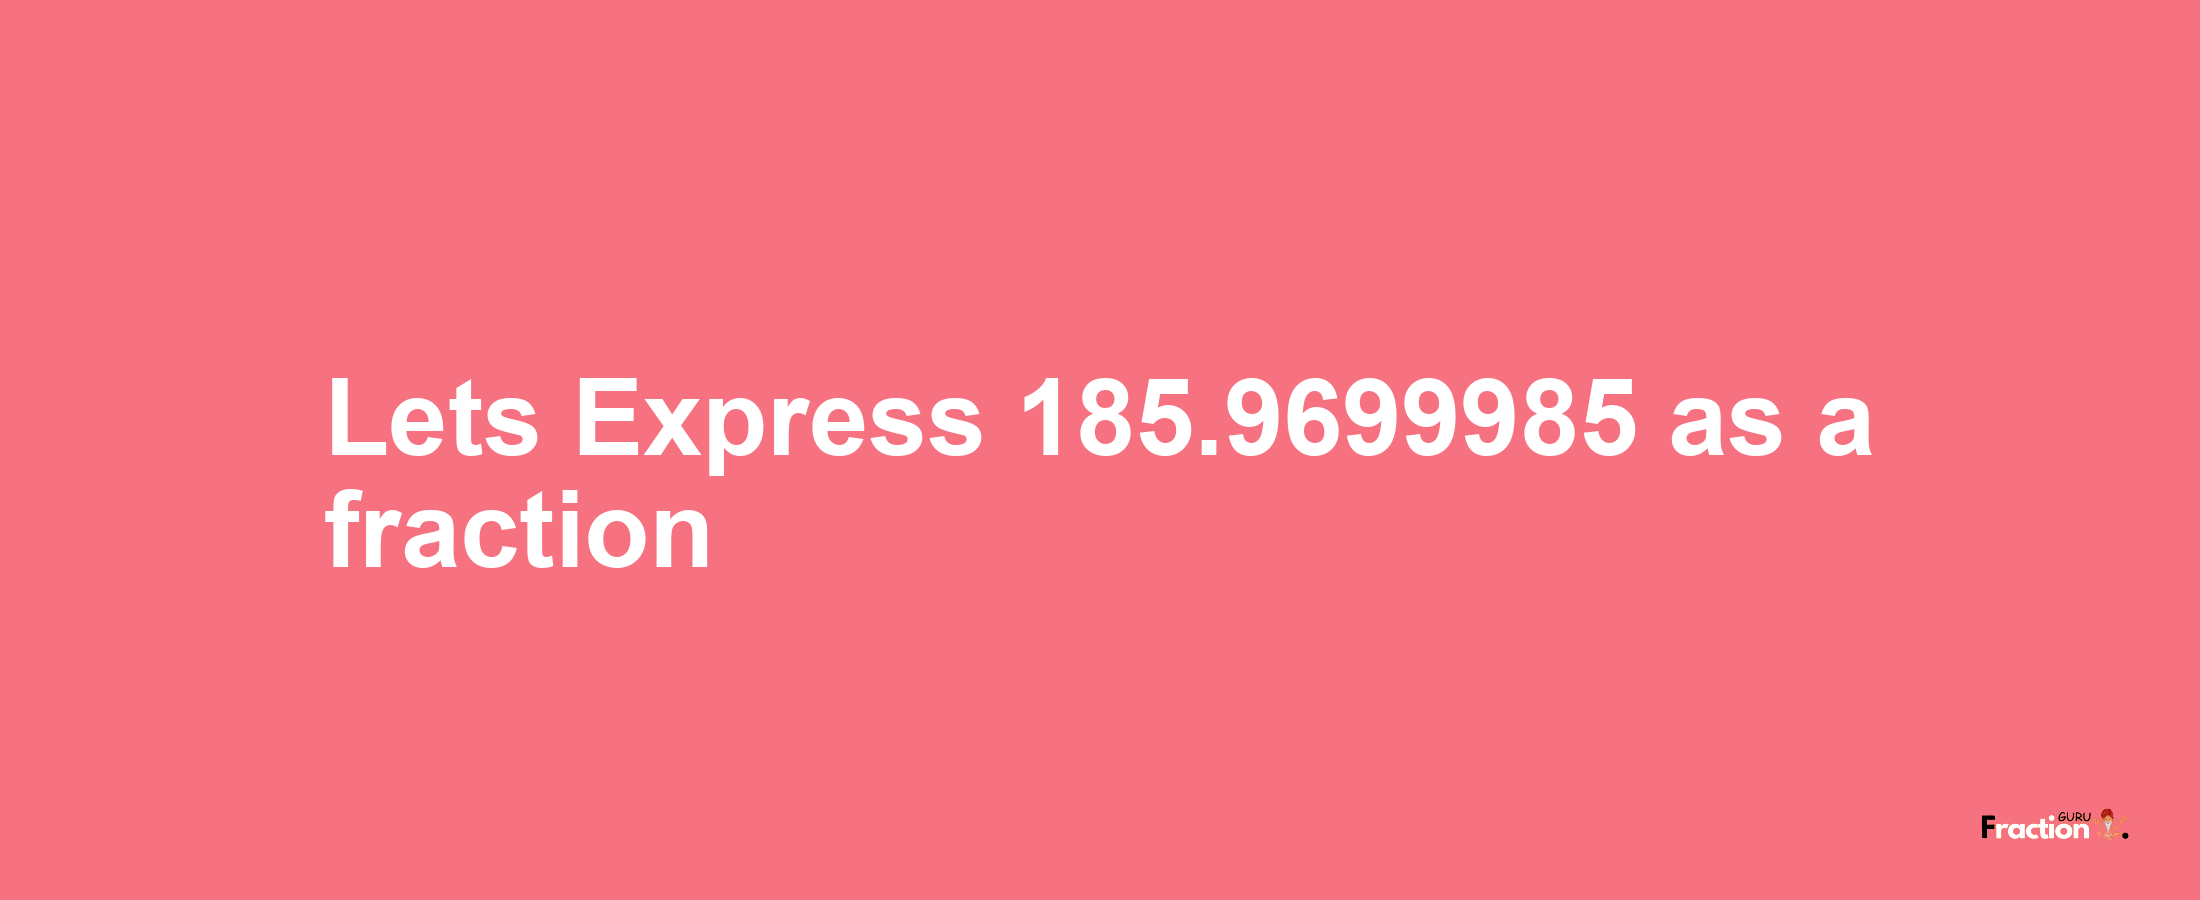 Lets Express 185.9699985 as afraction